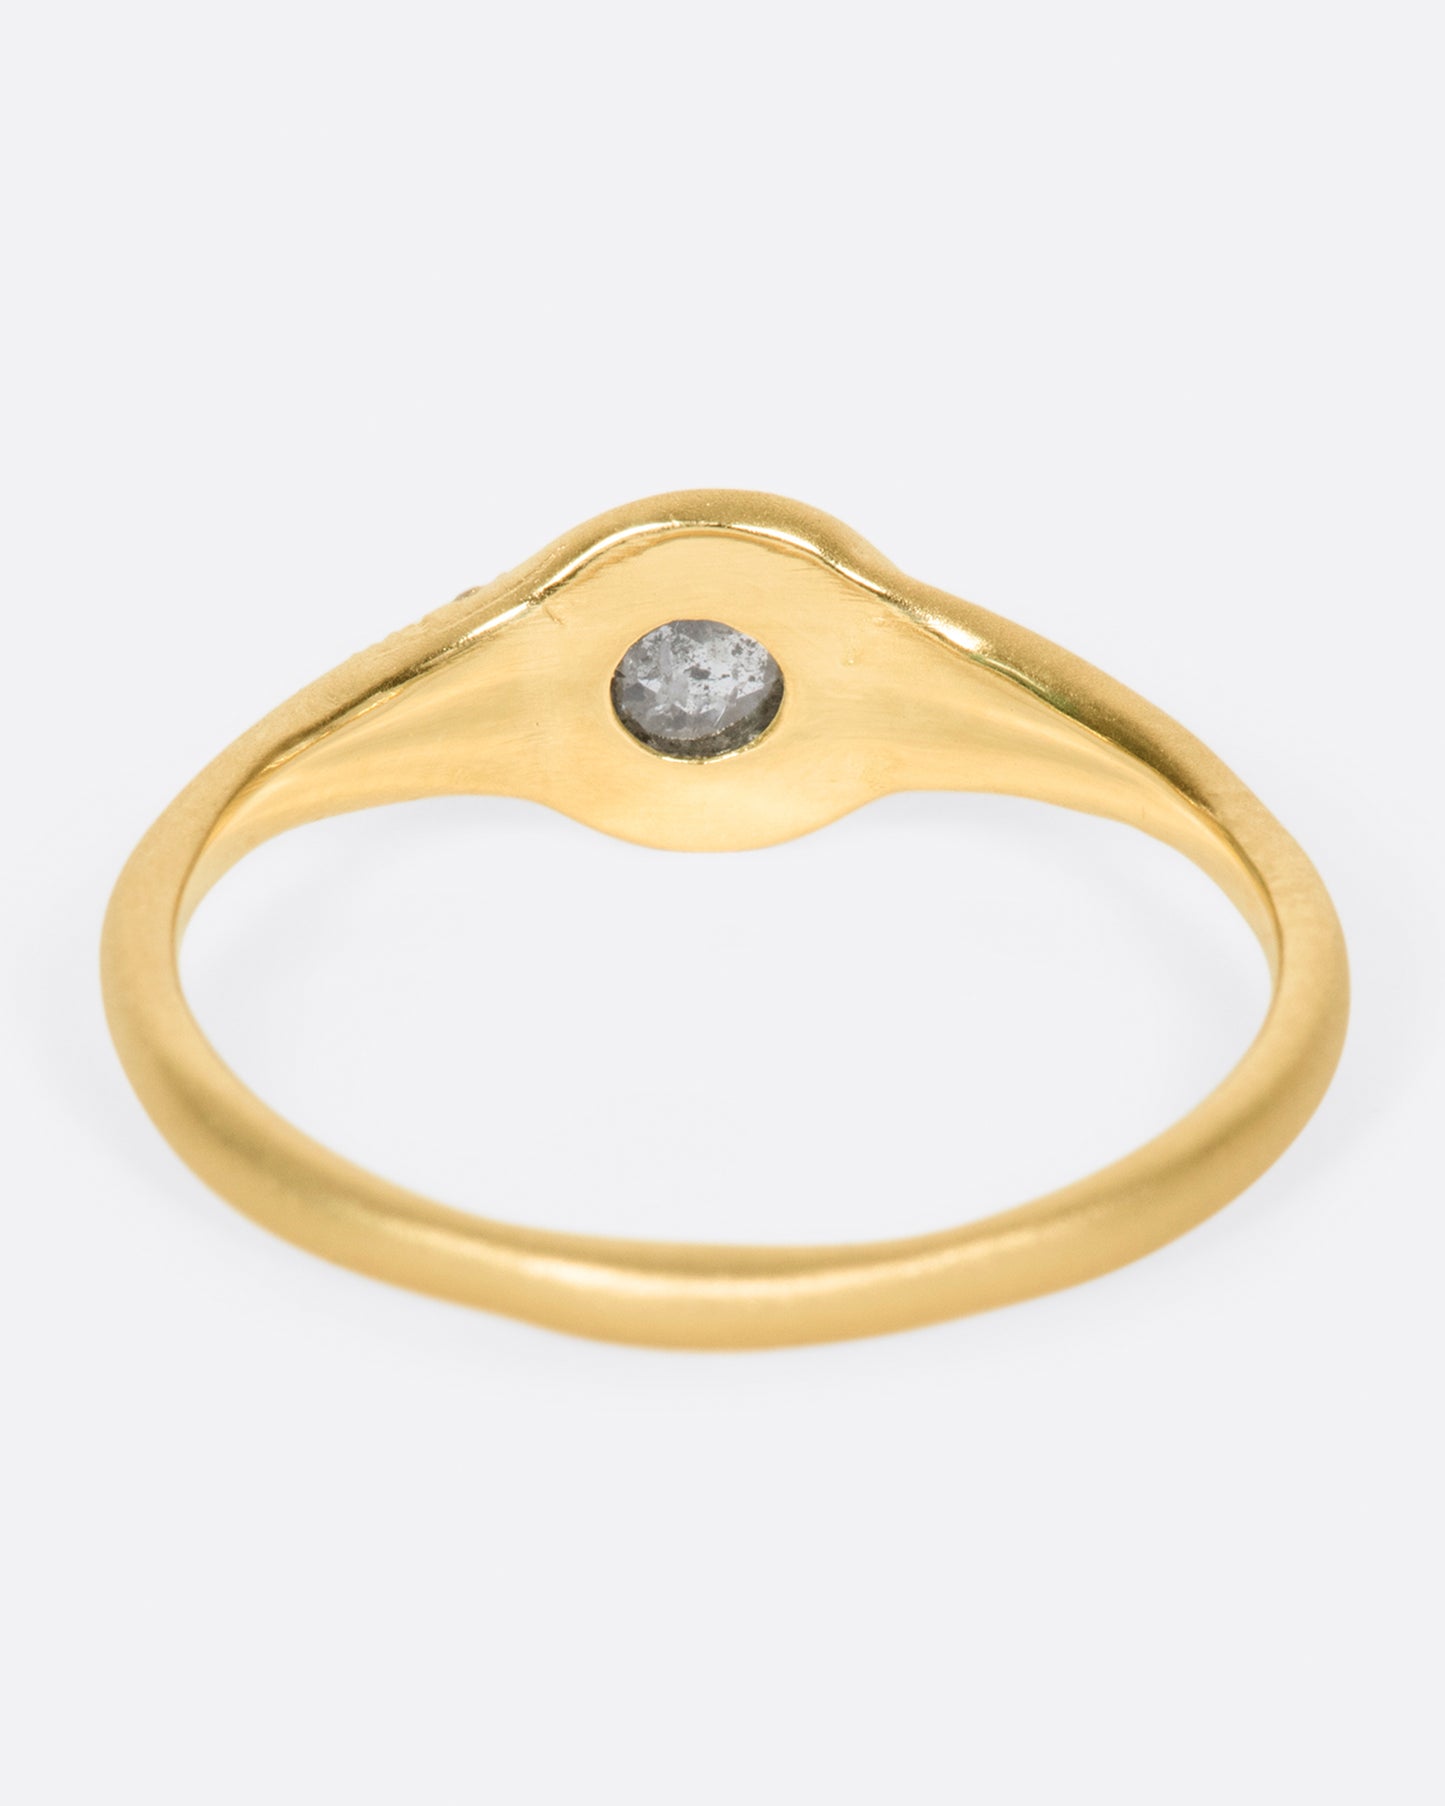 A brushed gold signet style ring with a salt and pepper diamond at its center and white diamond accents, shown from the back.